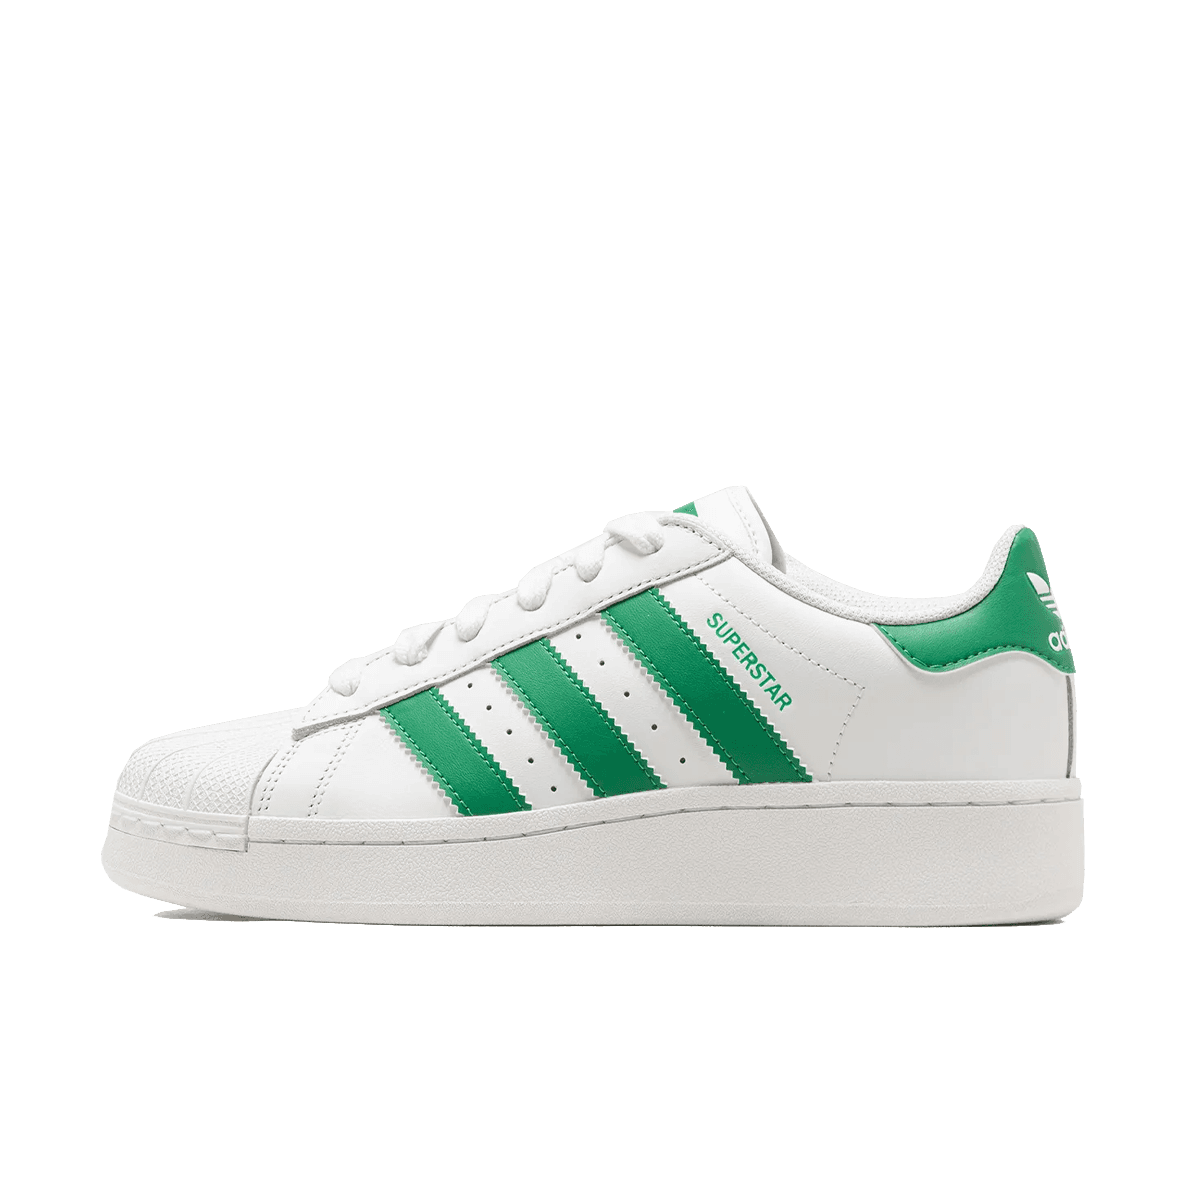 Adidas Court Magnetic | ID4717 | The Drop Date | Sneaker low